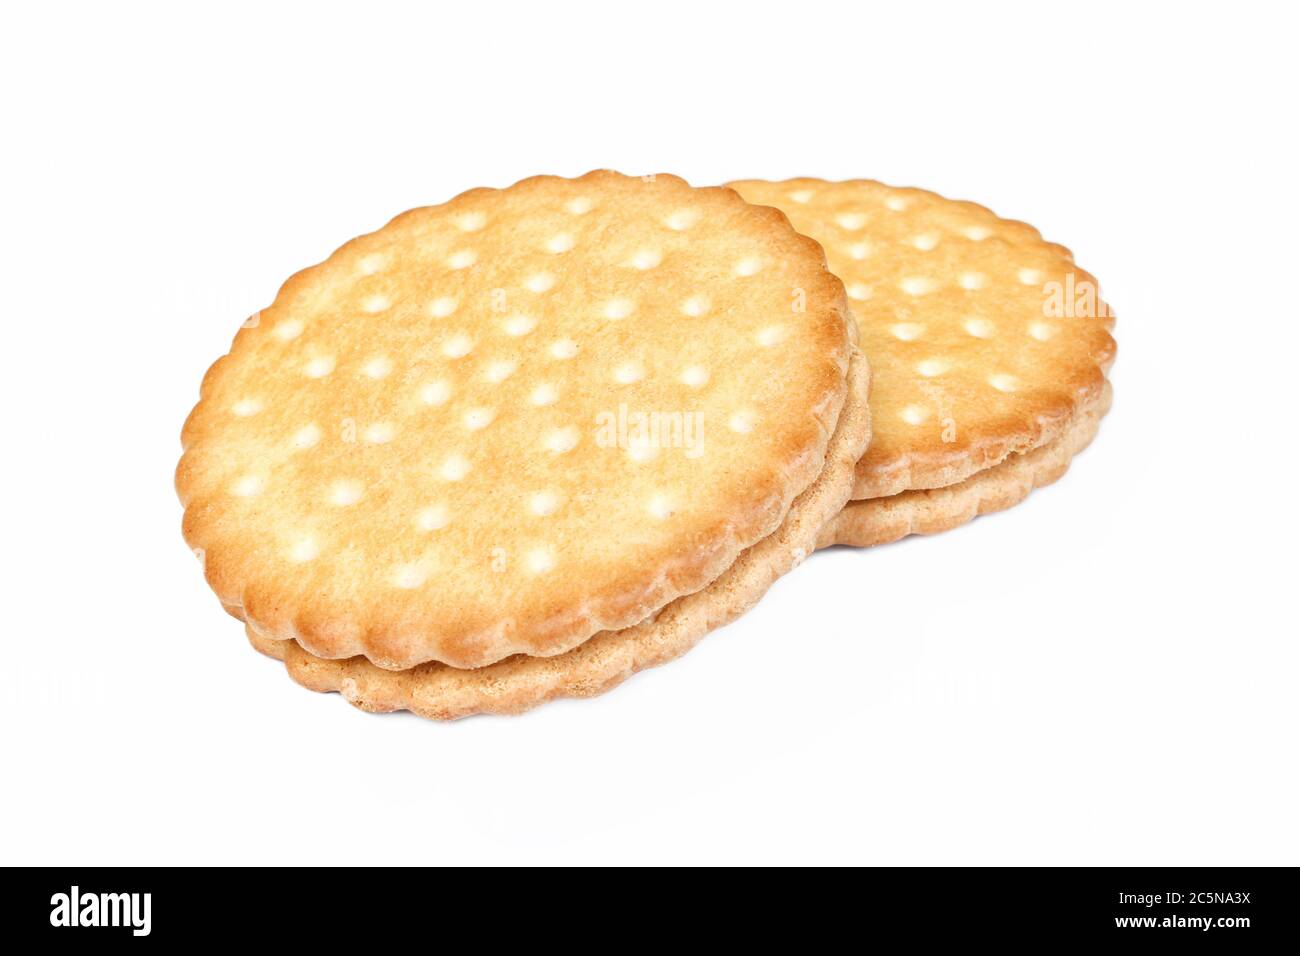 Pair of sandwich biscuits isolated on white background. Filled with cocoa cream Stock Photo